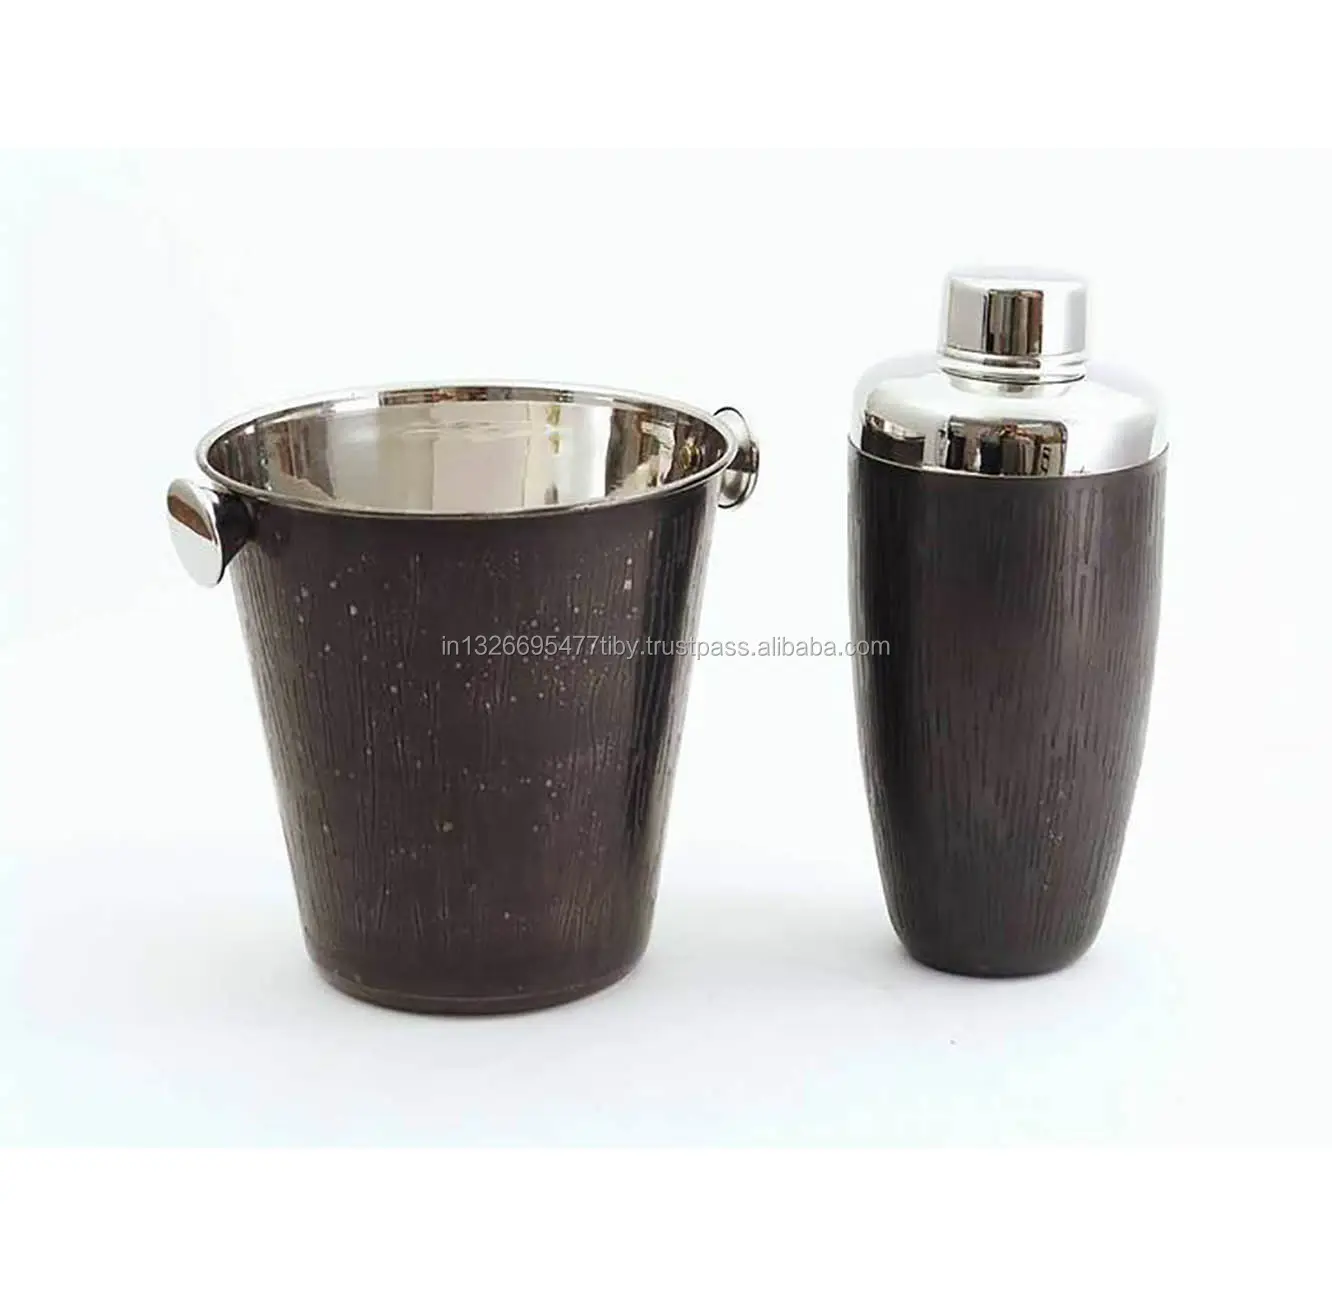 Metal Ice Bucket With Cocktail Shaker With Gray Powder Coating Finishing Textured Design Round Shape For Serving Wholesale Price